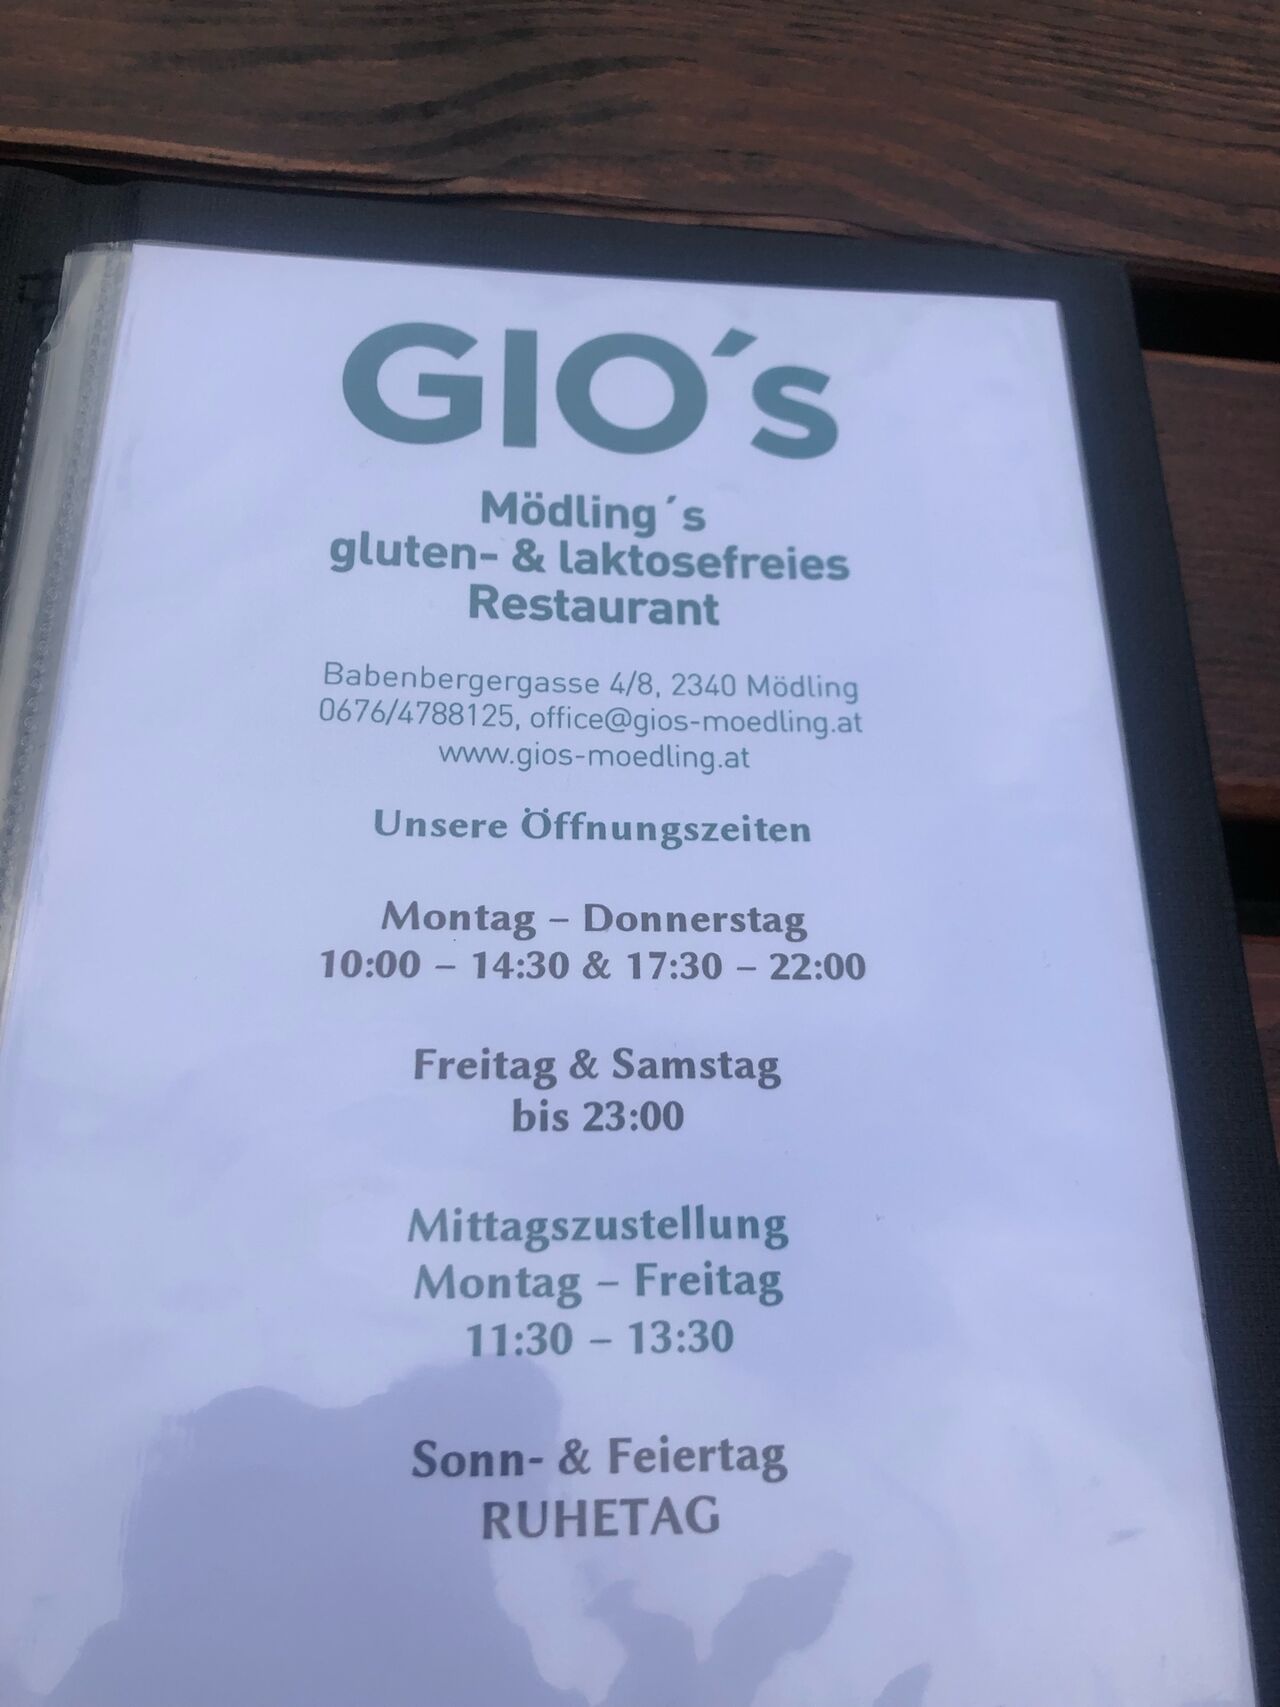 A photo of Gio’s